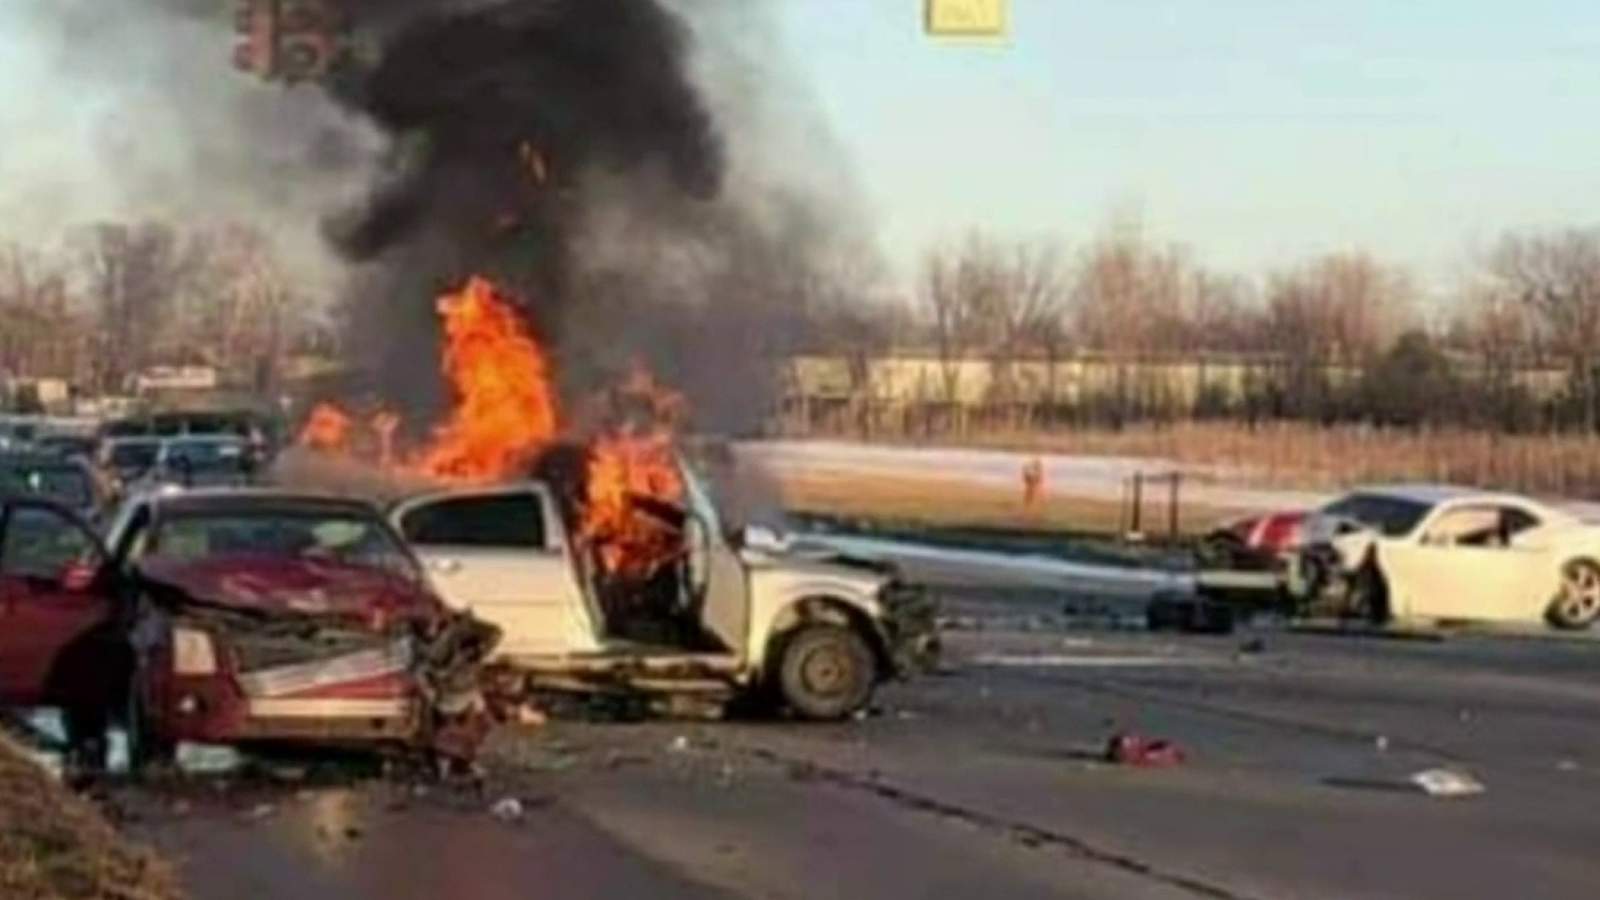 Bystanders jump into action in fiery crash that killed Romulus woman